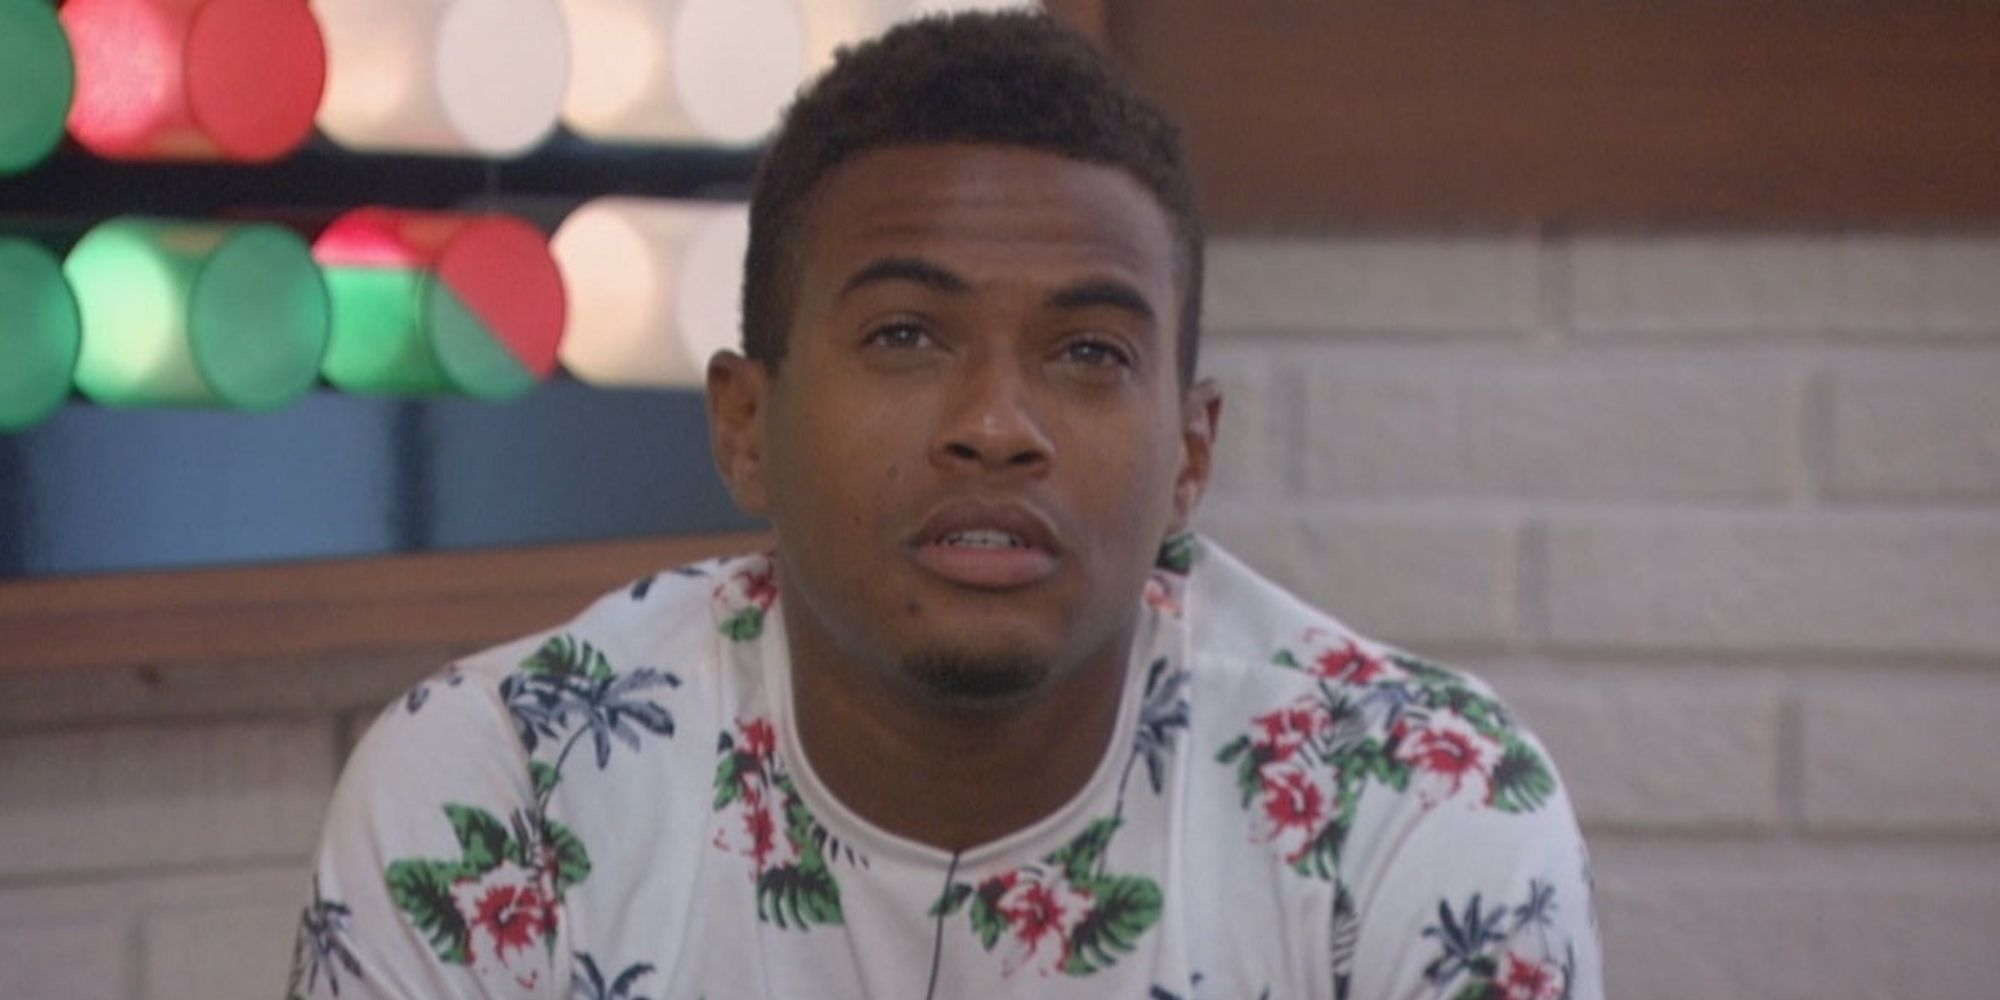 David from Big Brother All-Stars, wearing a floral shirt and looking up.